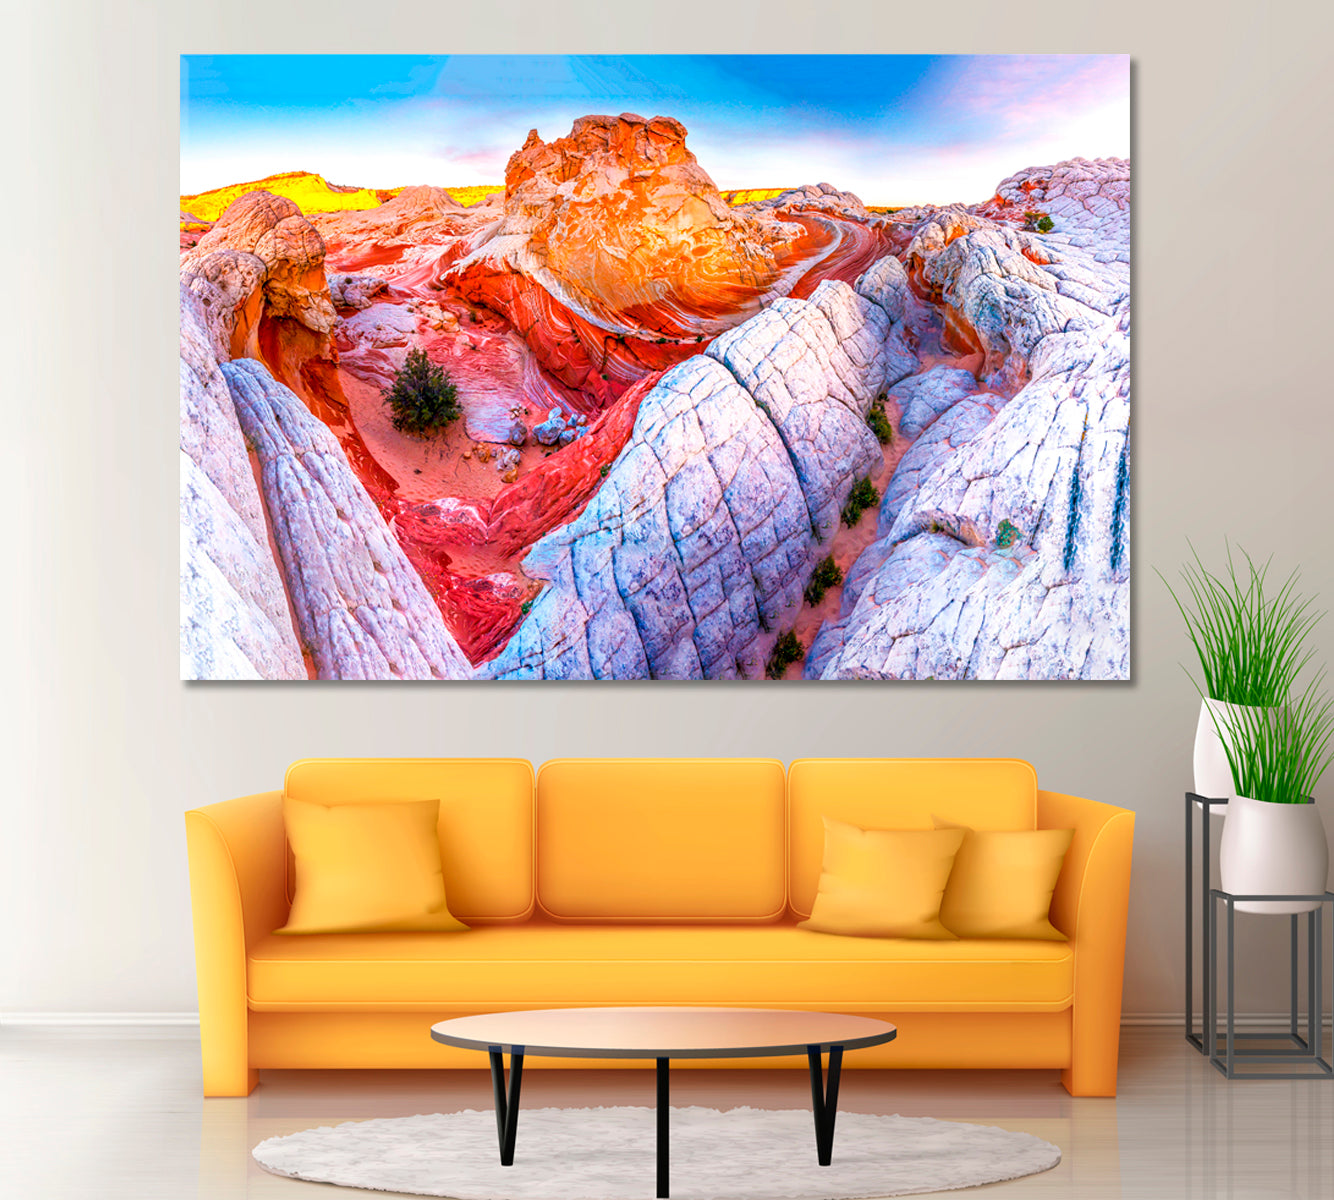 Red Rock Mountain Canyon Landscape Canvas Print ArtLexy 1 Panel 24"x16" inches 